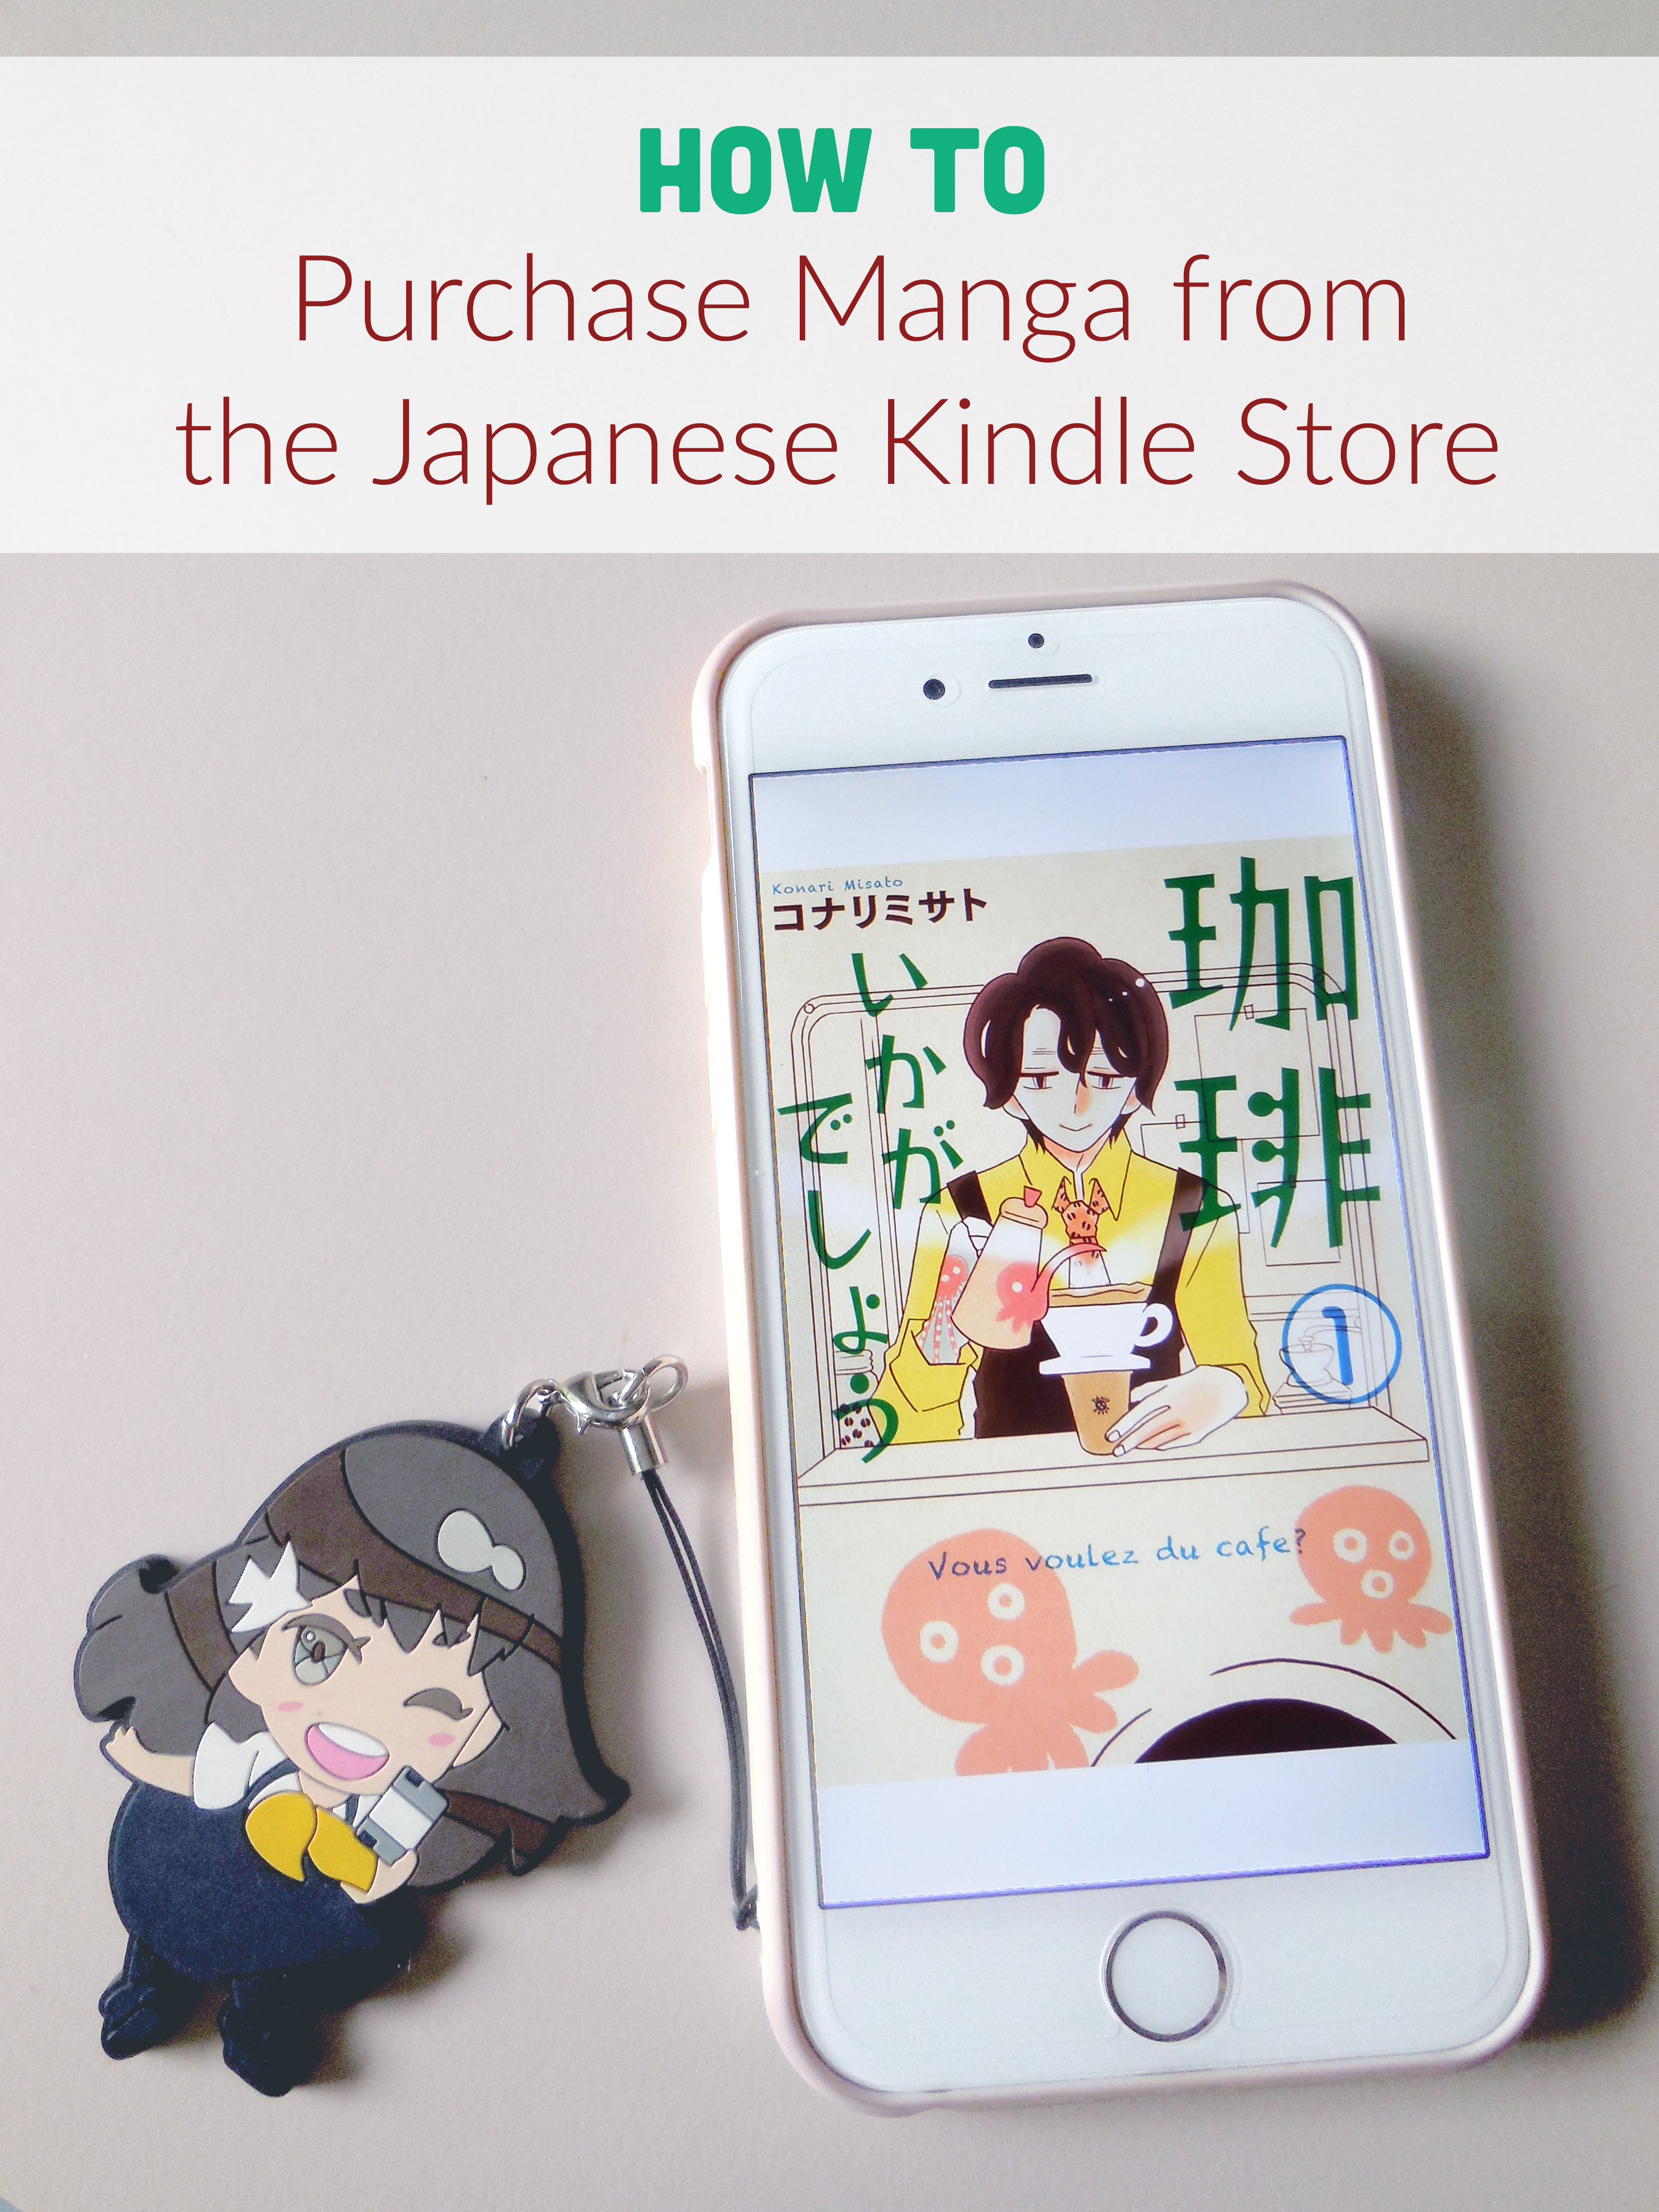 How to Purchase Manga from the Japanese Kindle Store